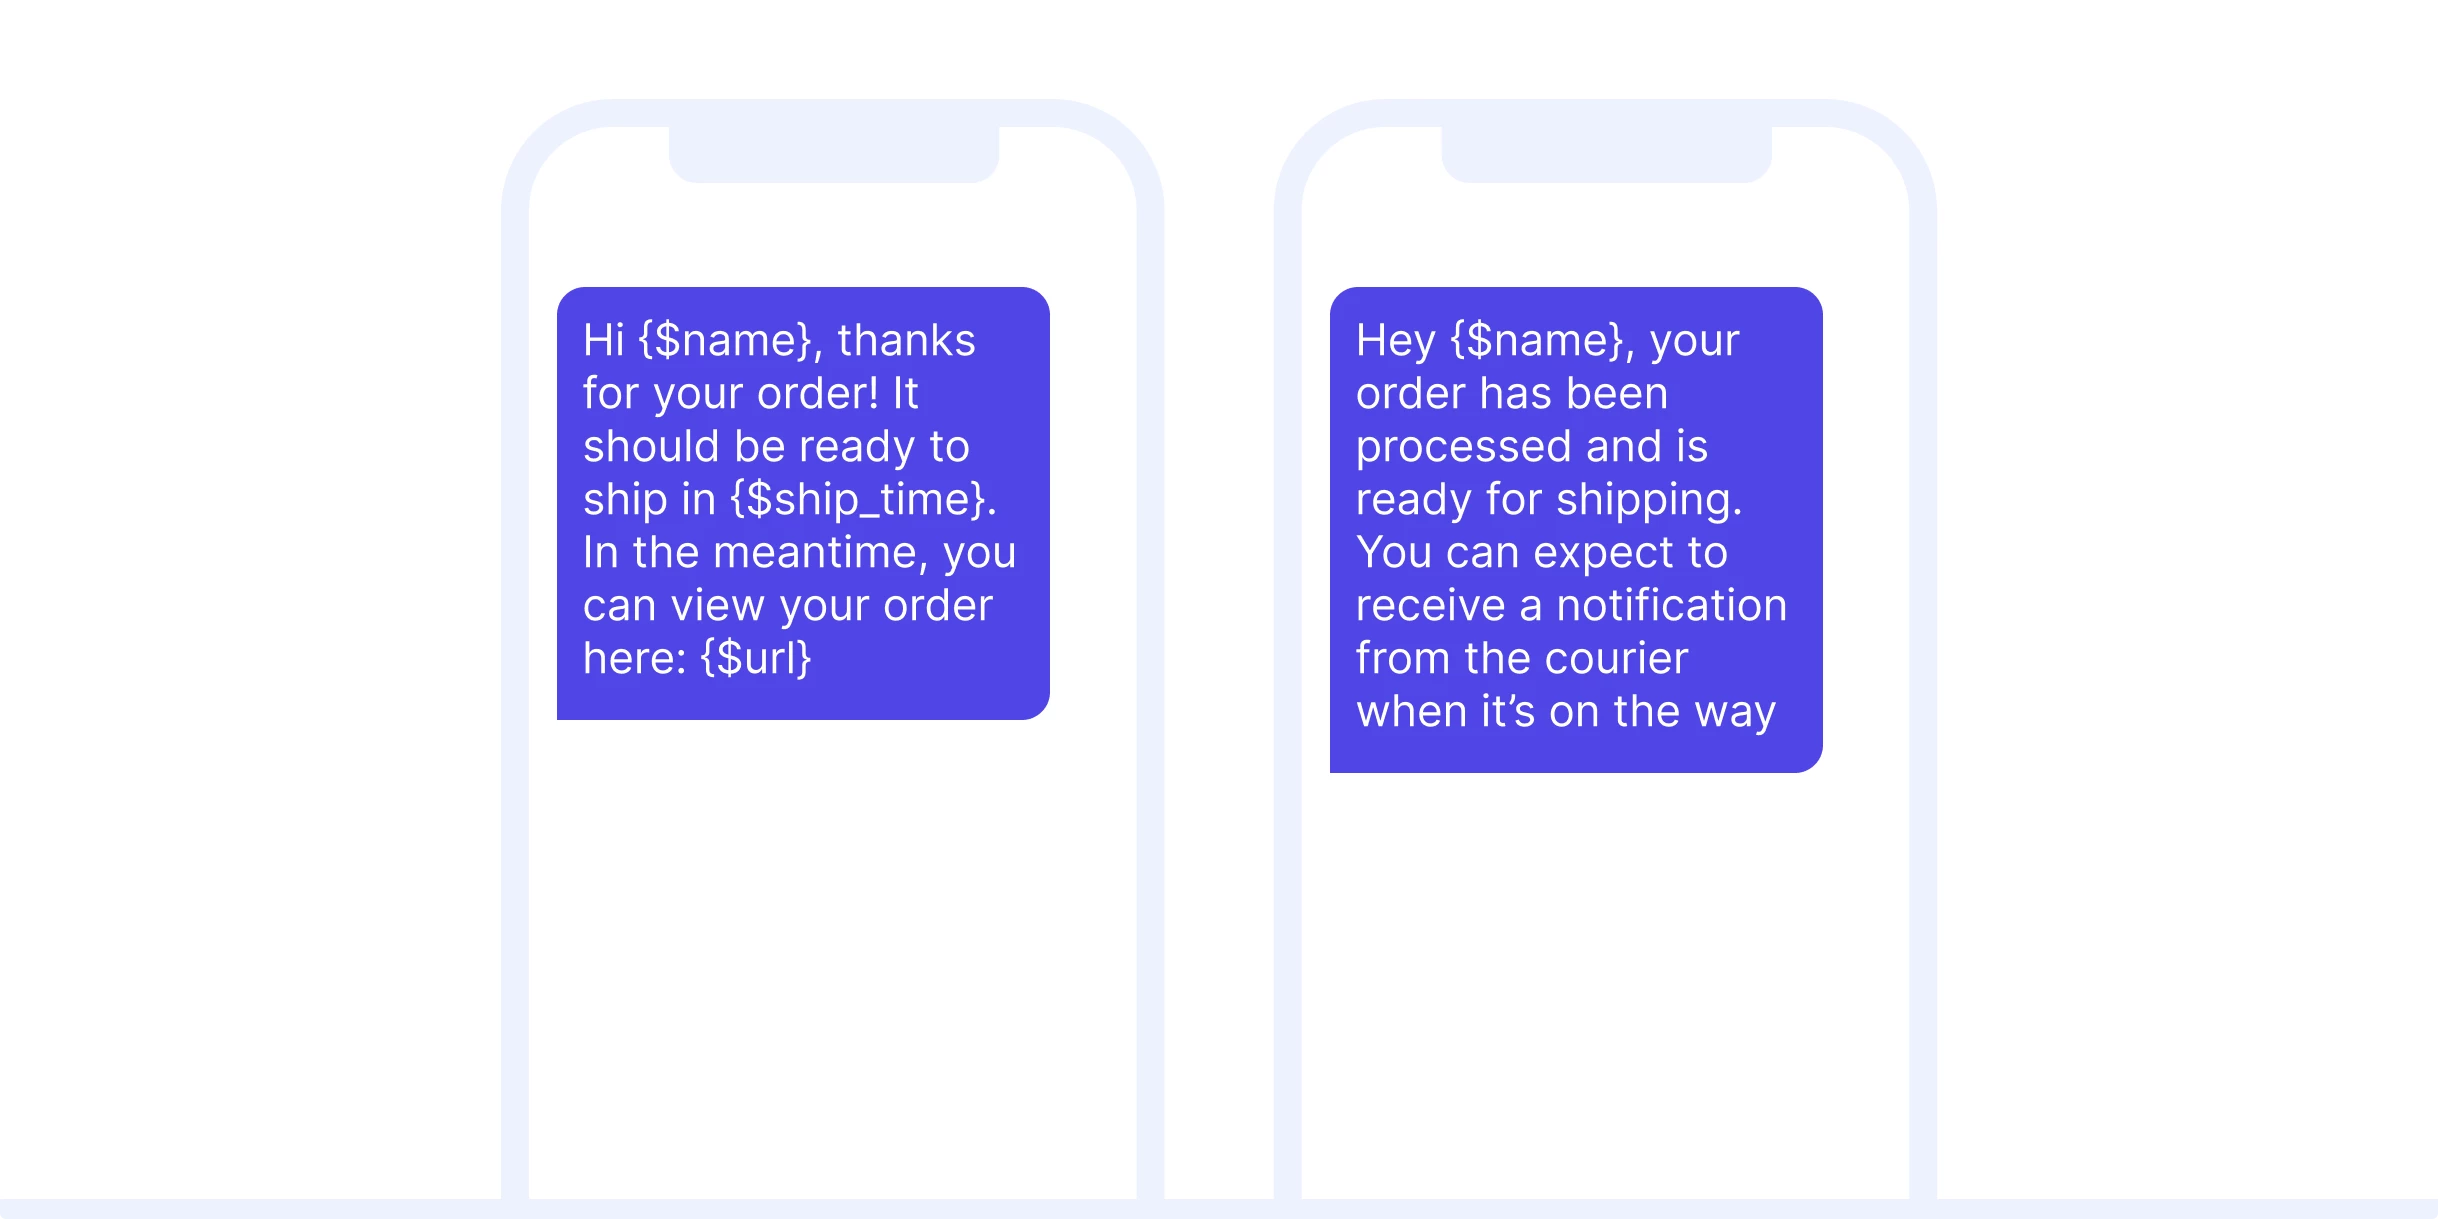 Transactional SMS examples for order confirmation and status updates.